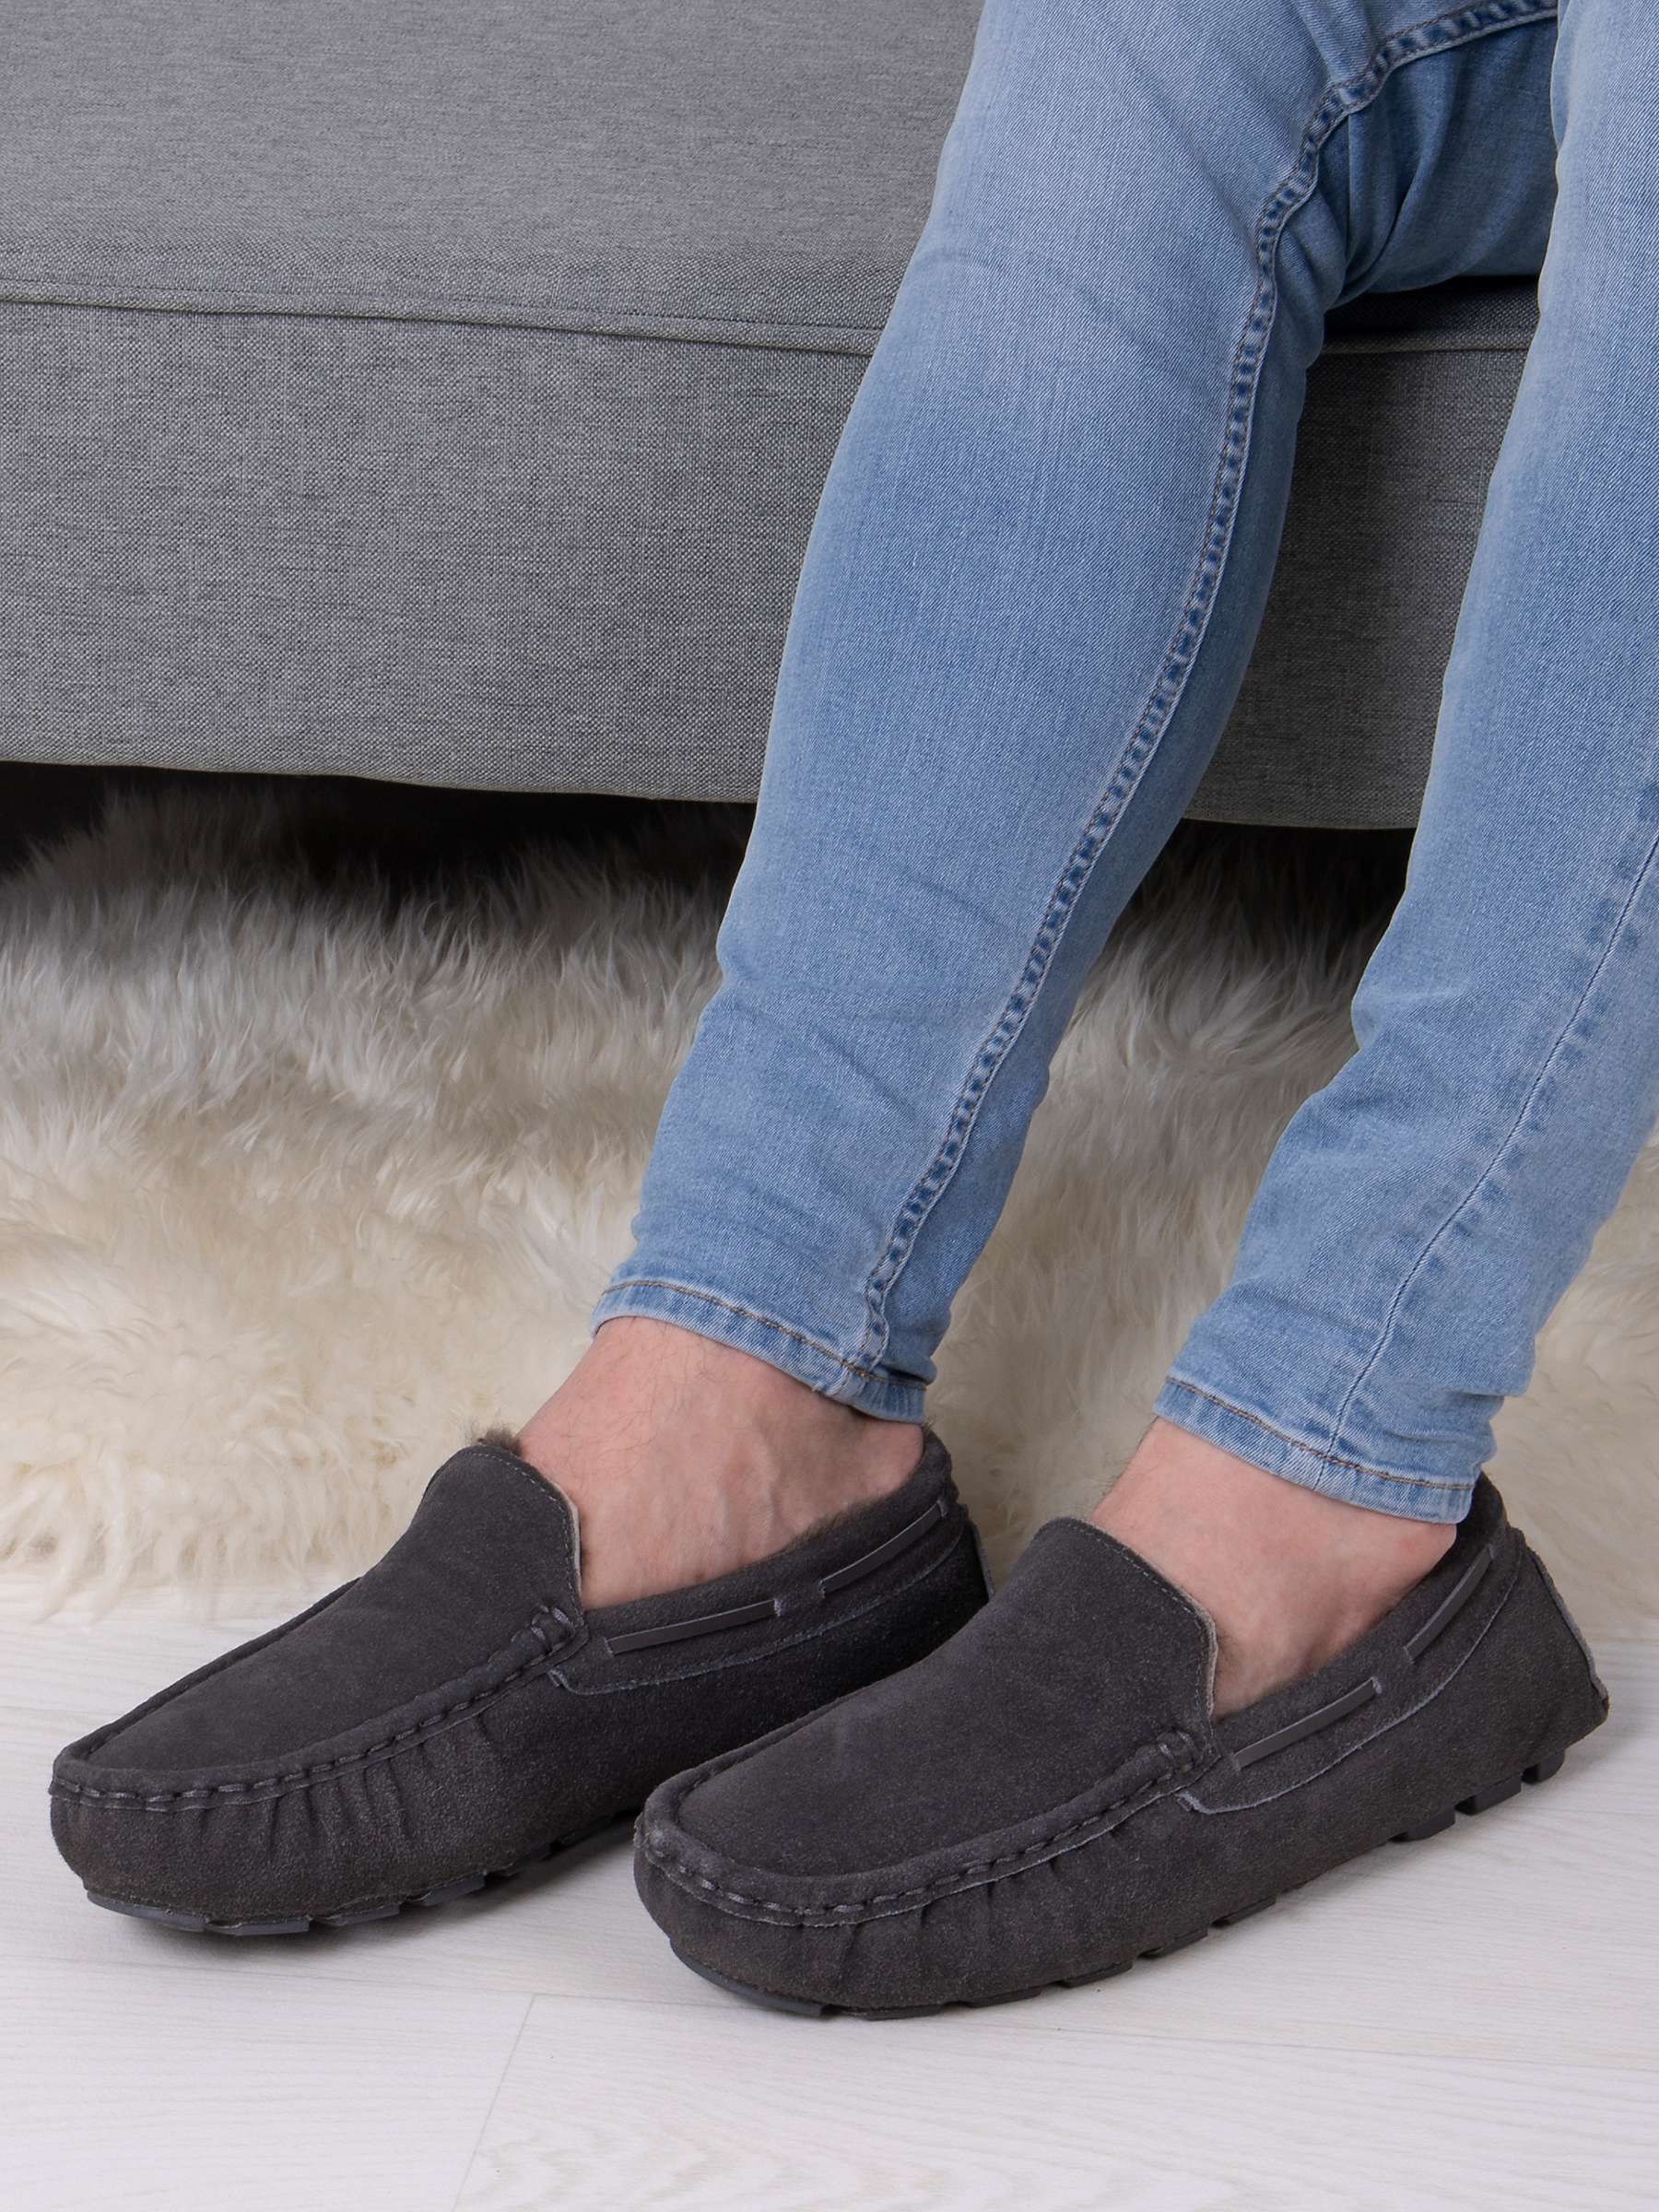 Buy totes Isotoner Suede Moccasin Slippers Online at johnlewis.com